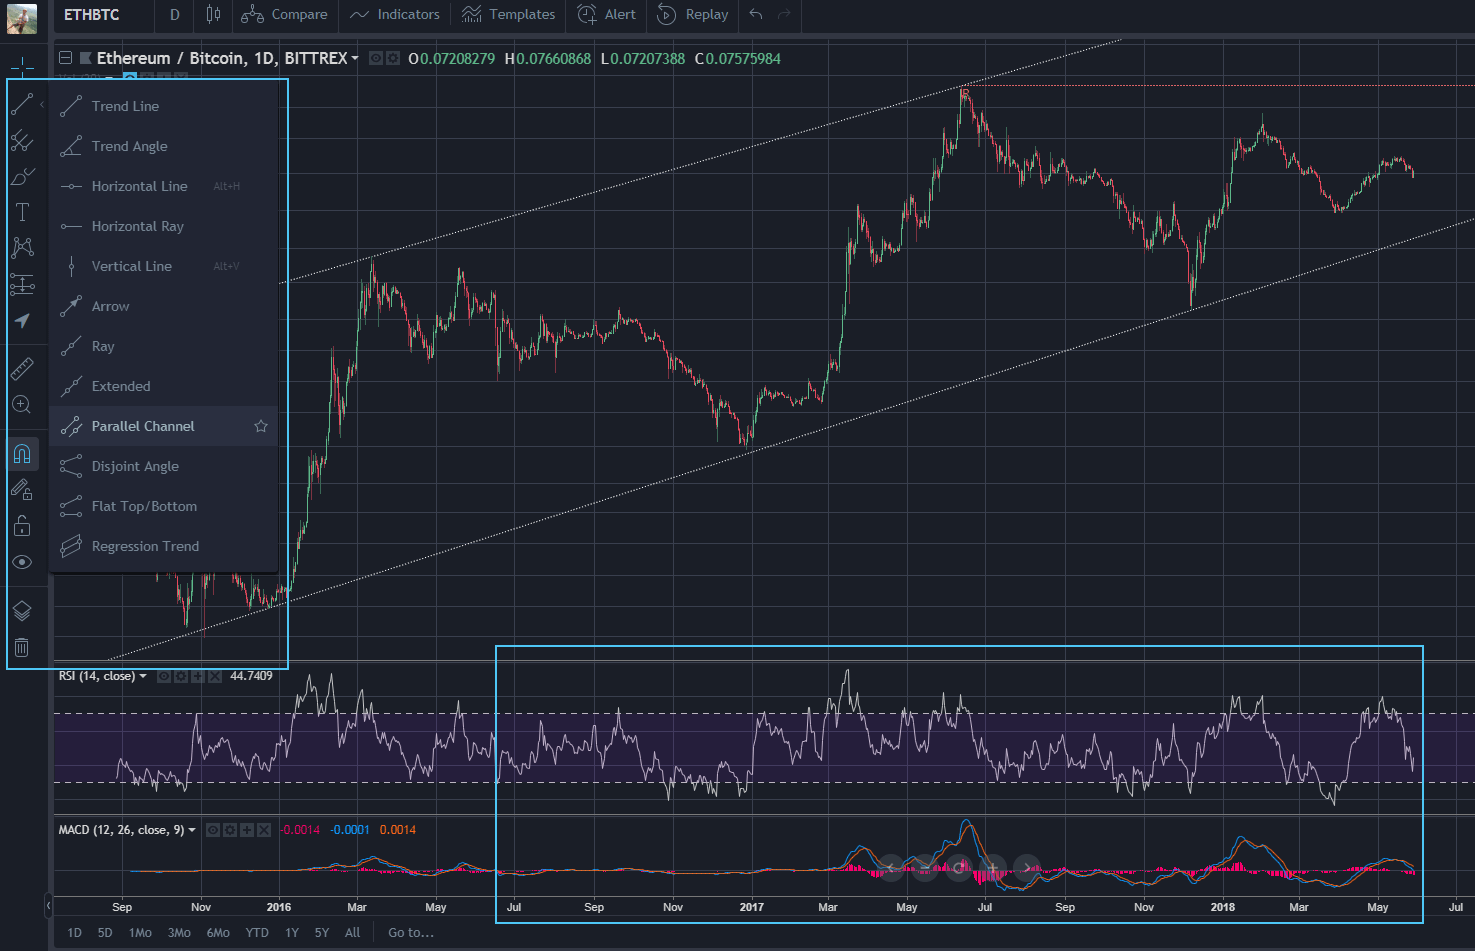 TradingView Charting Tools - Cryptocurrency Charting TradingView